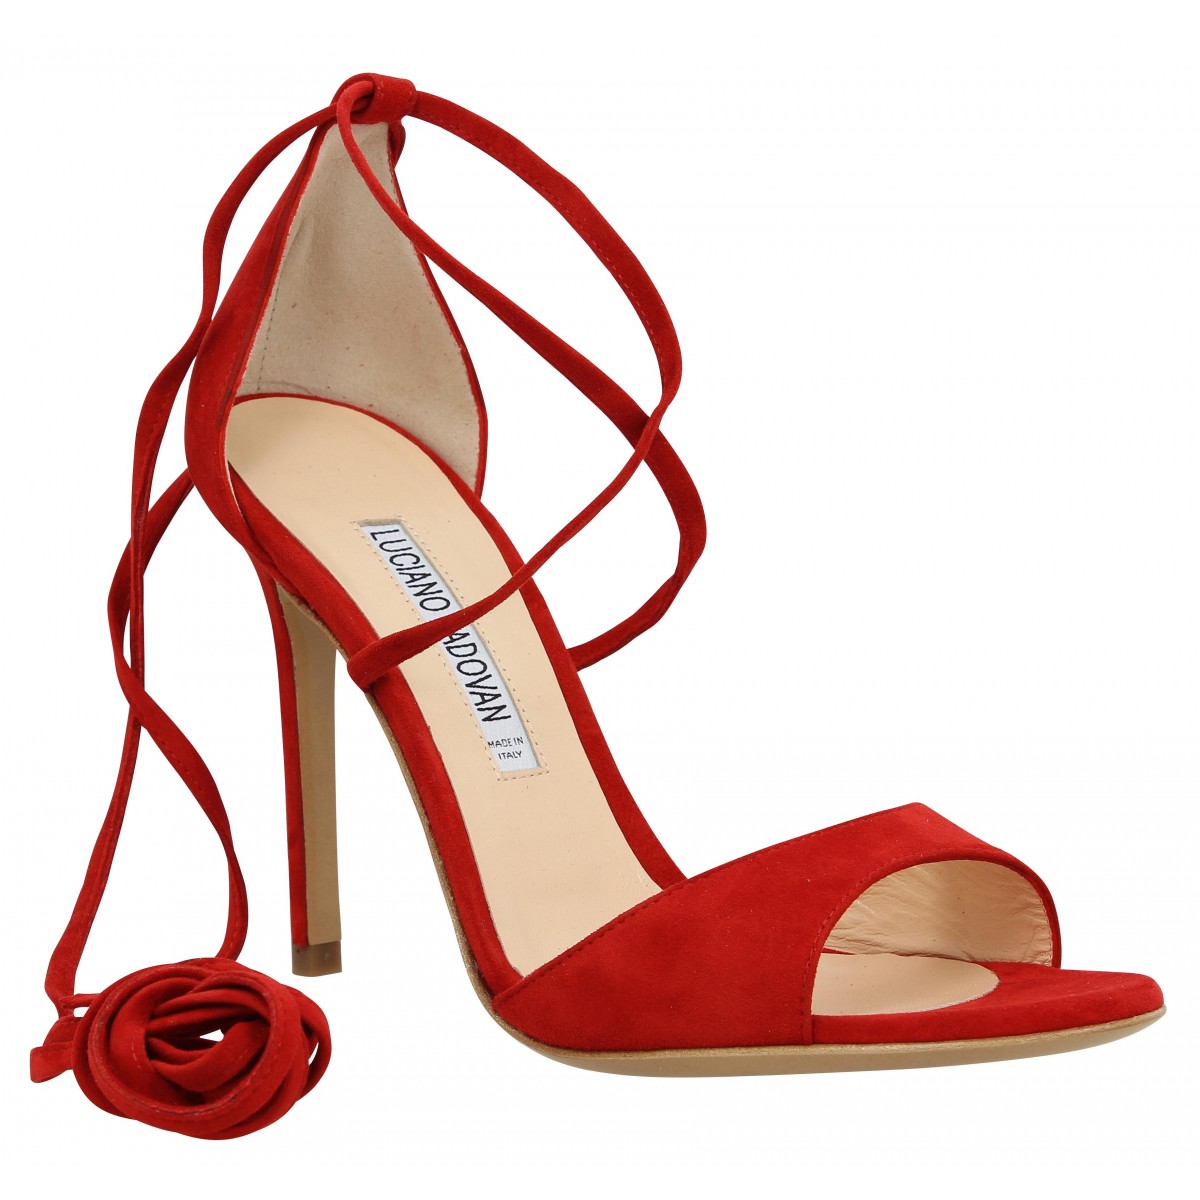 Sandales talons LUCIANO PADOVAN Mirand velours Femme Rouge